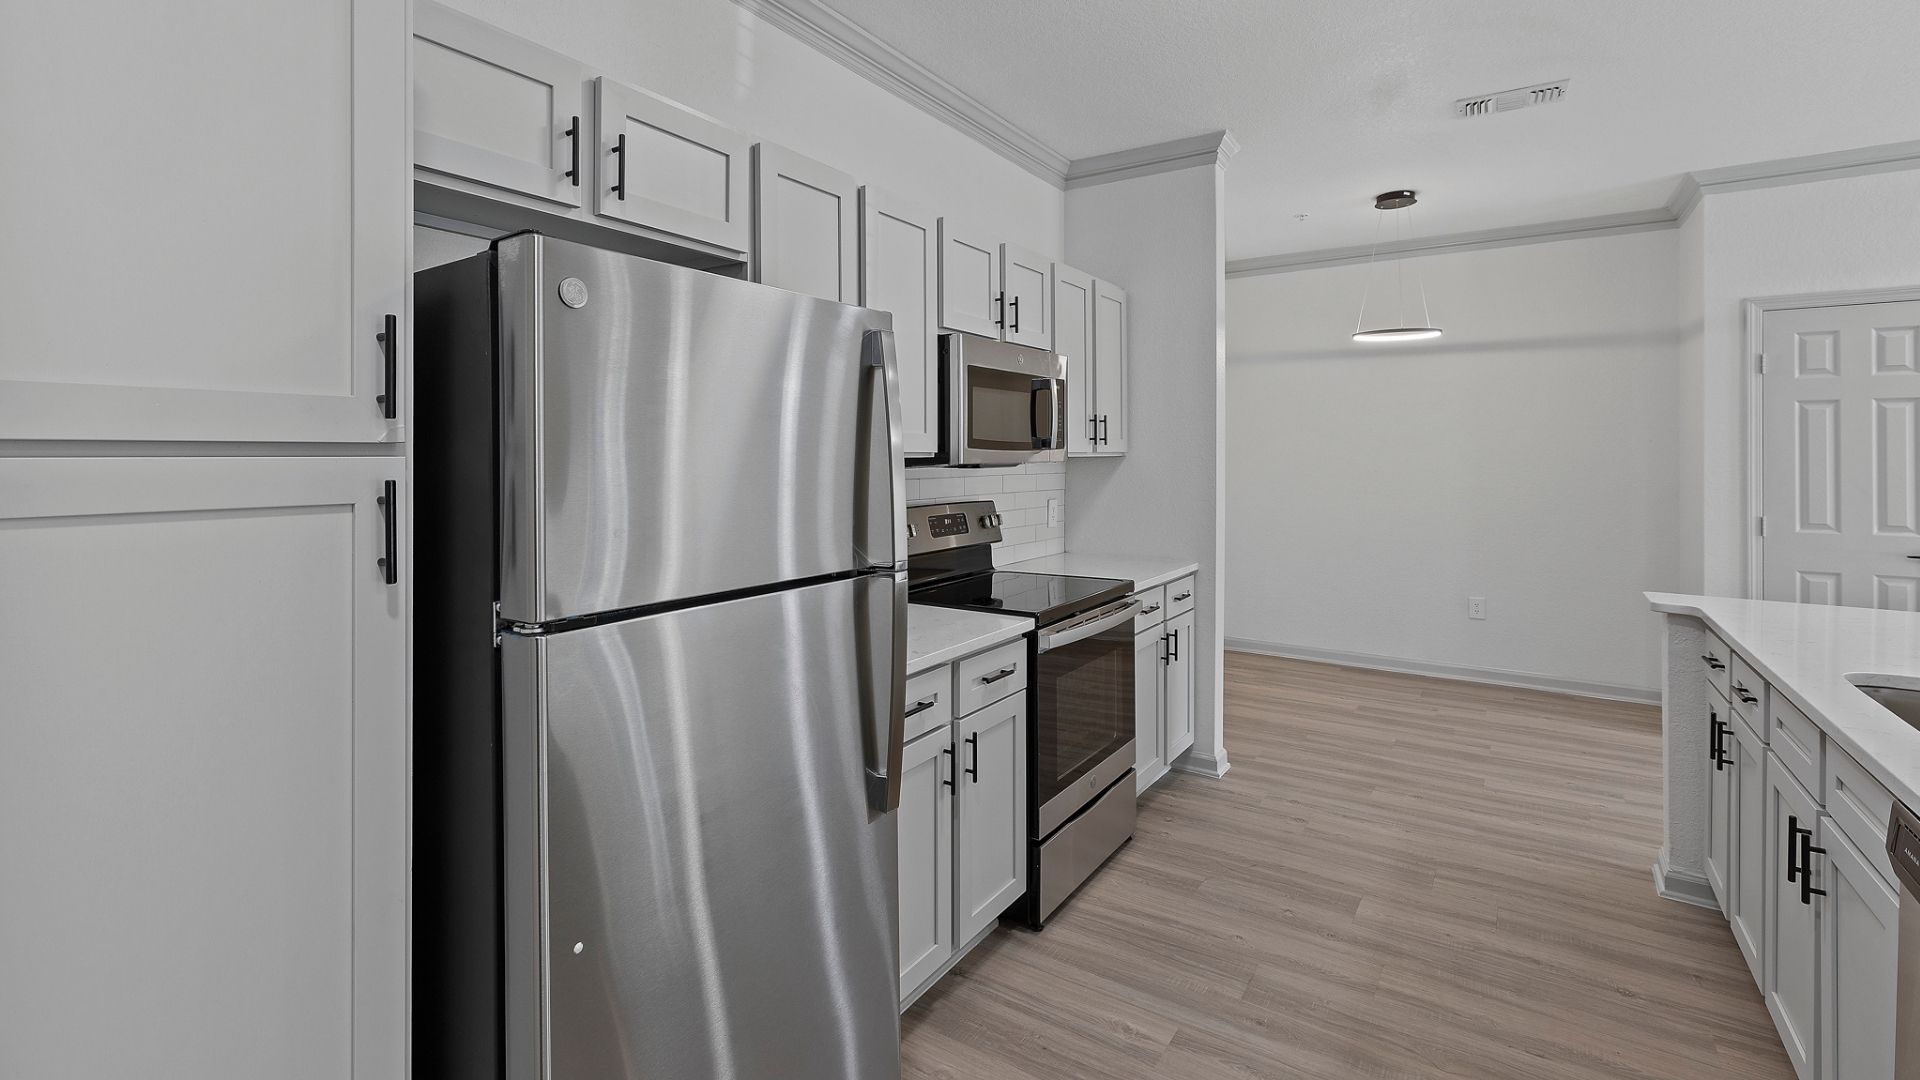 Renovated Kitchen with Quartz Countertops, black hardware, and stainless steel appliances.